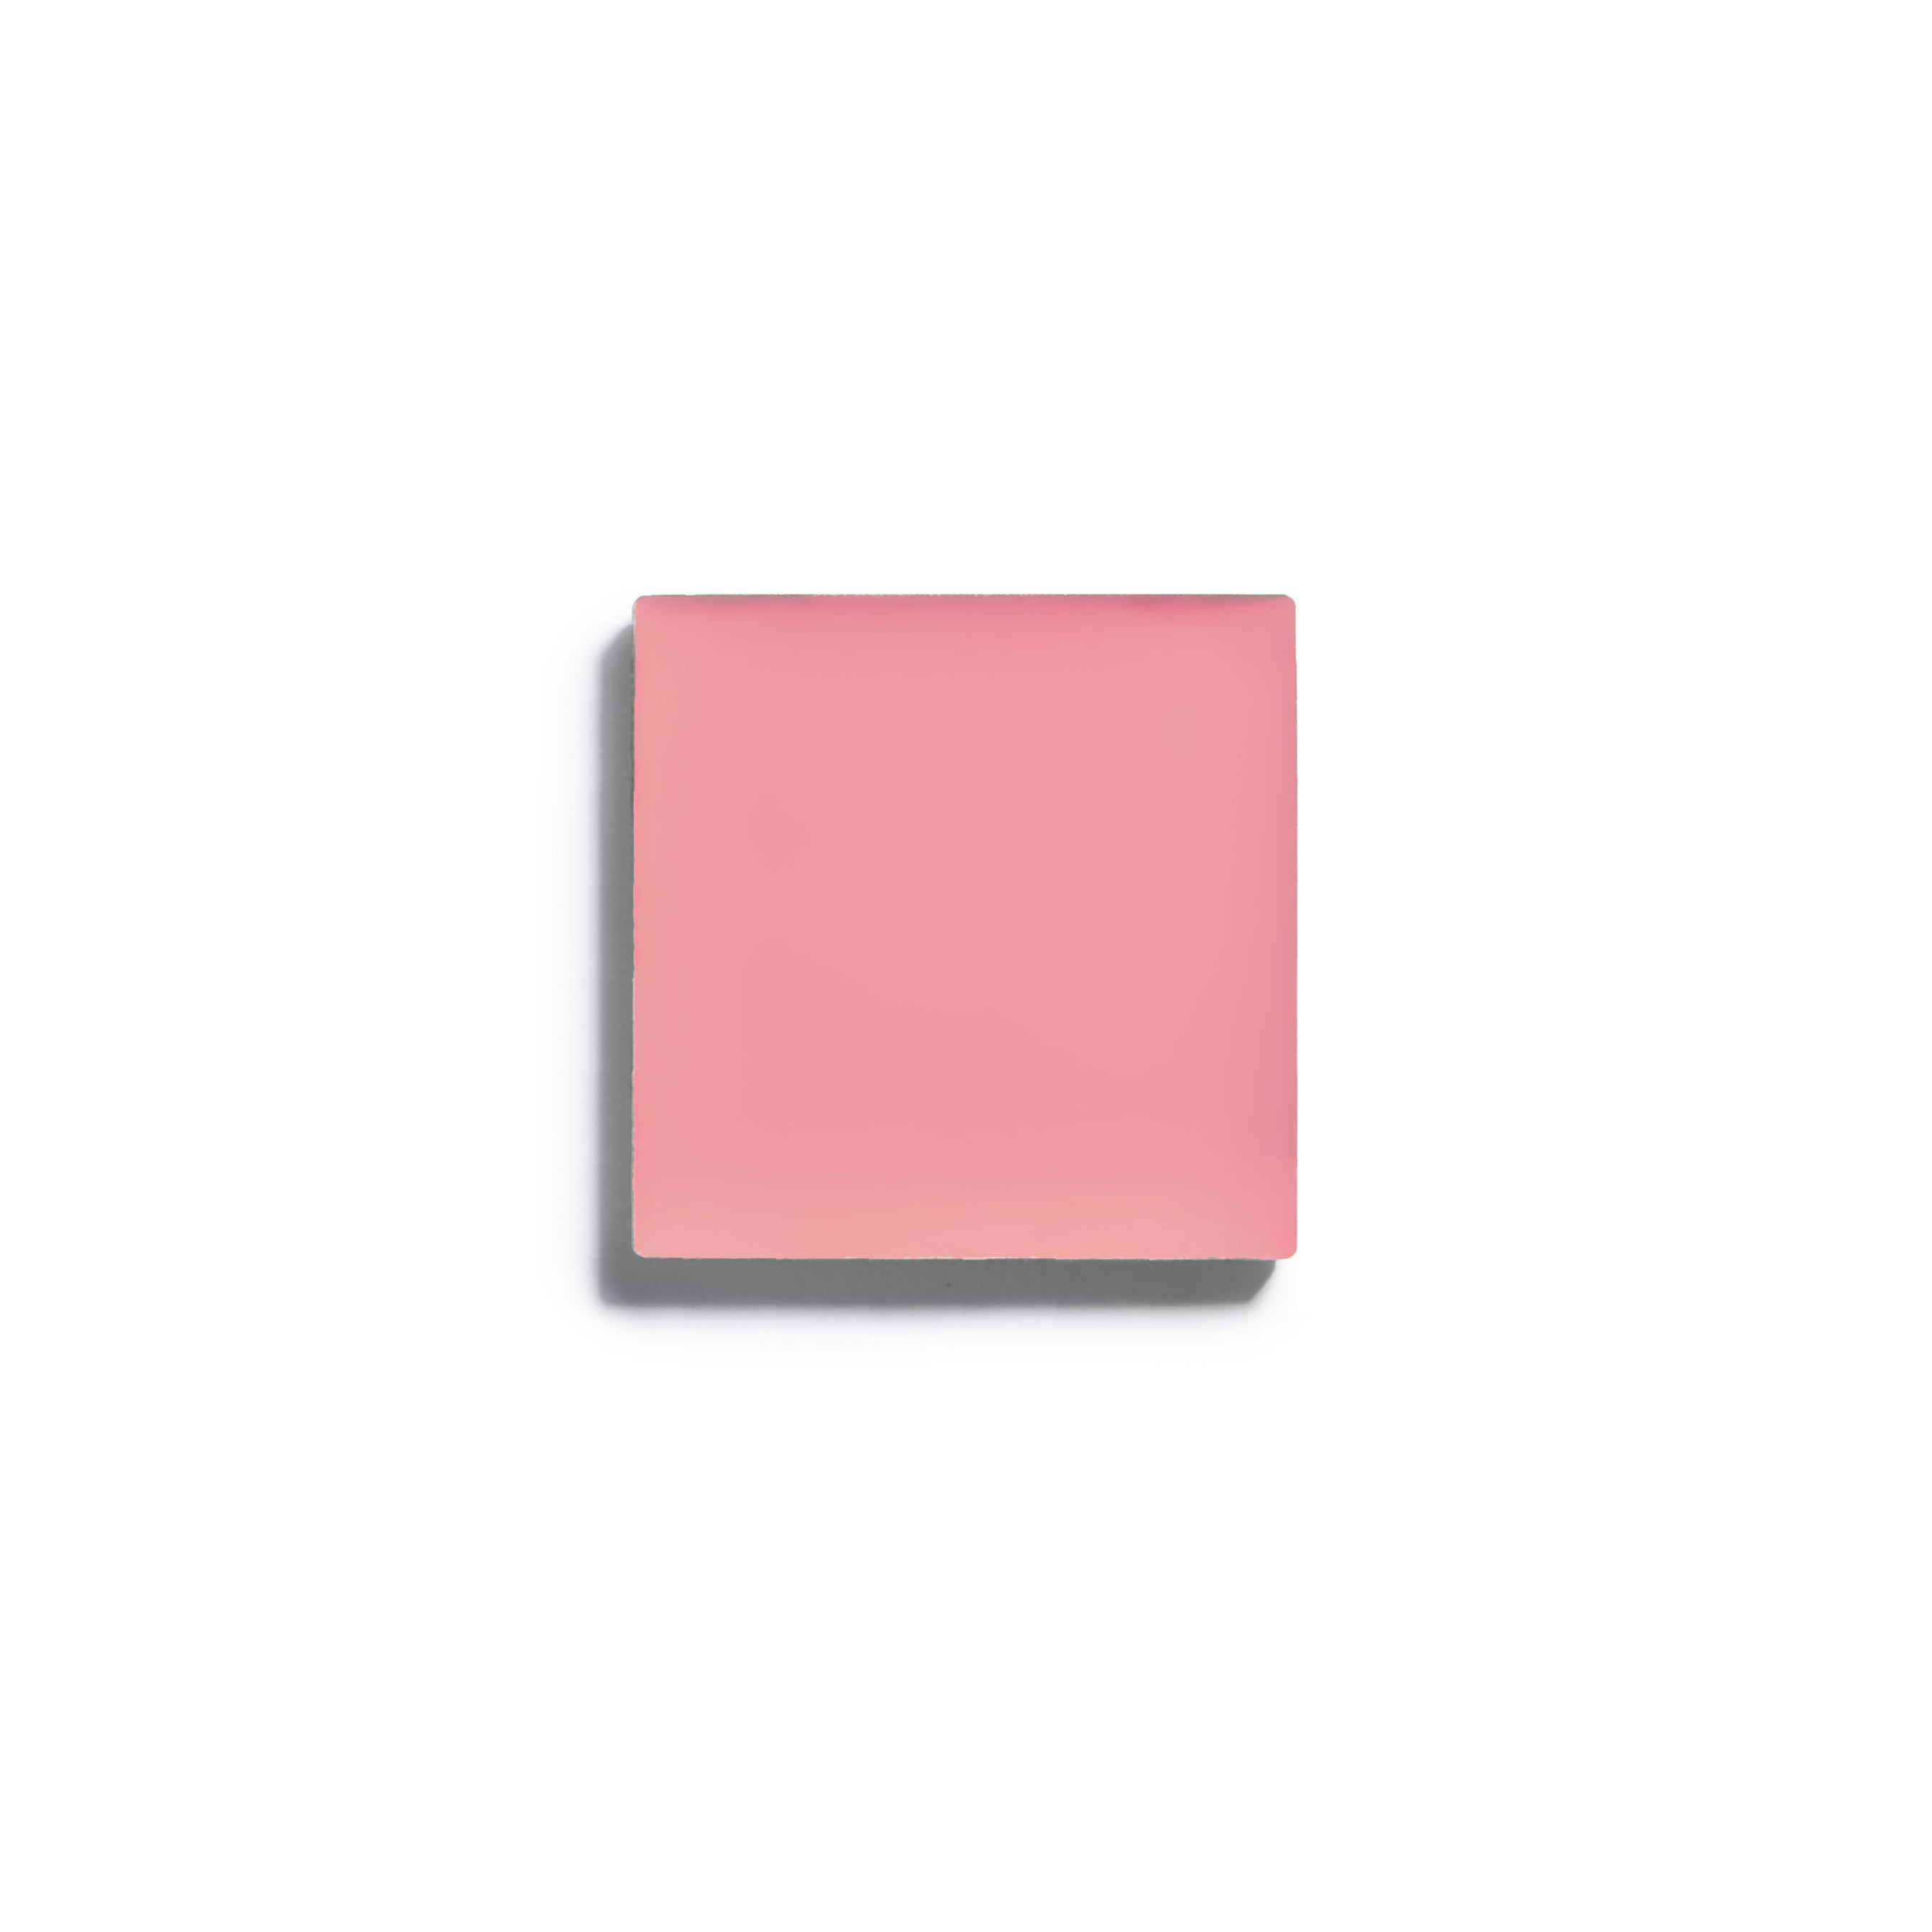 Reverence (cool-toned petal pink)